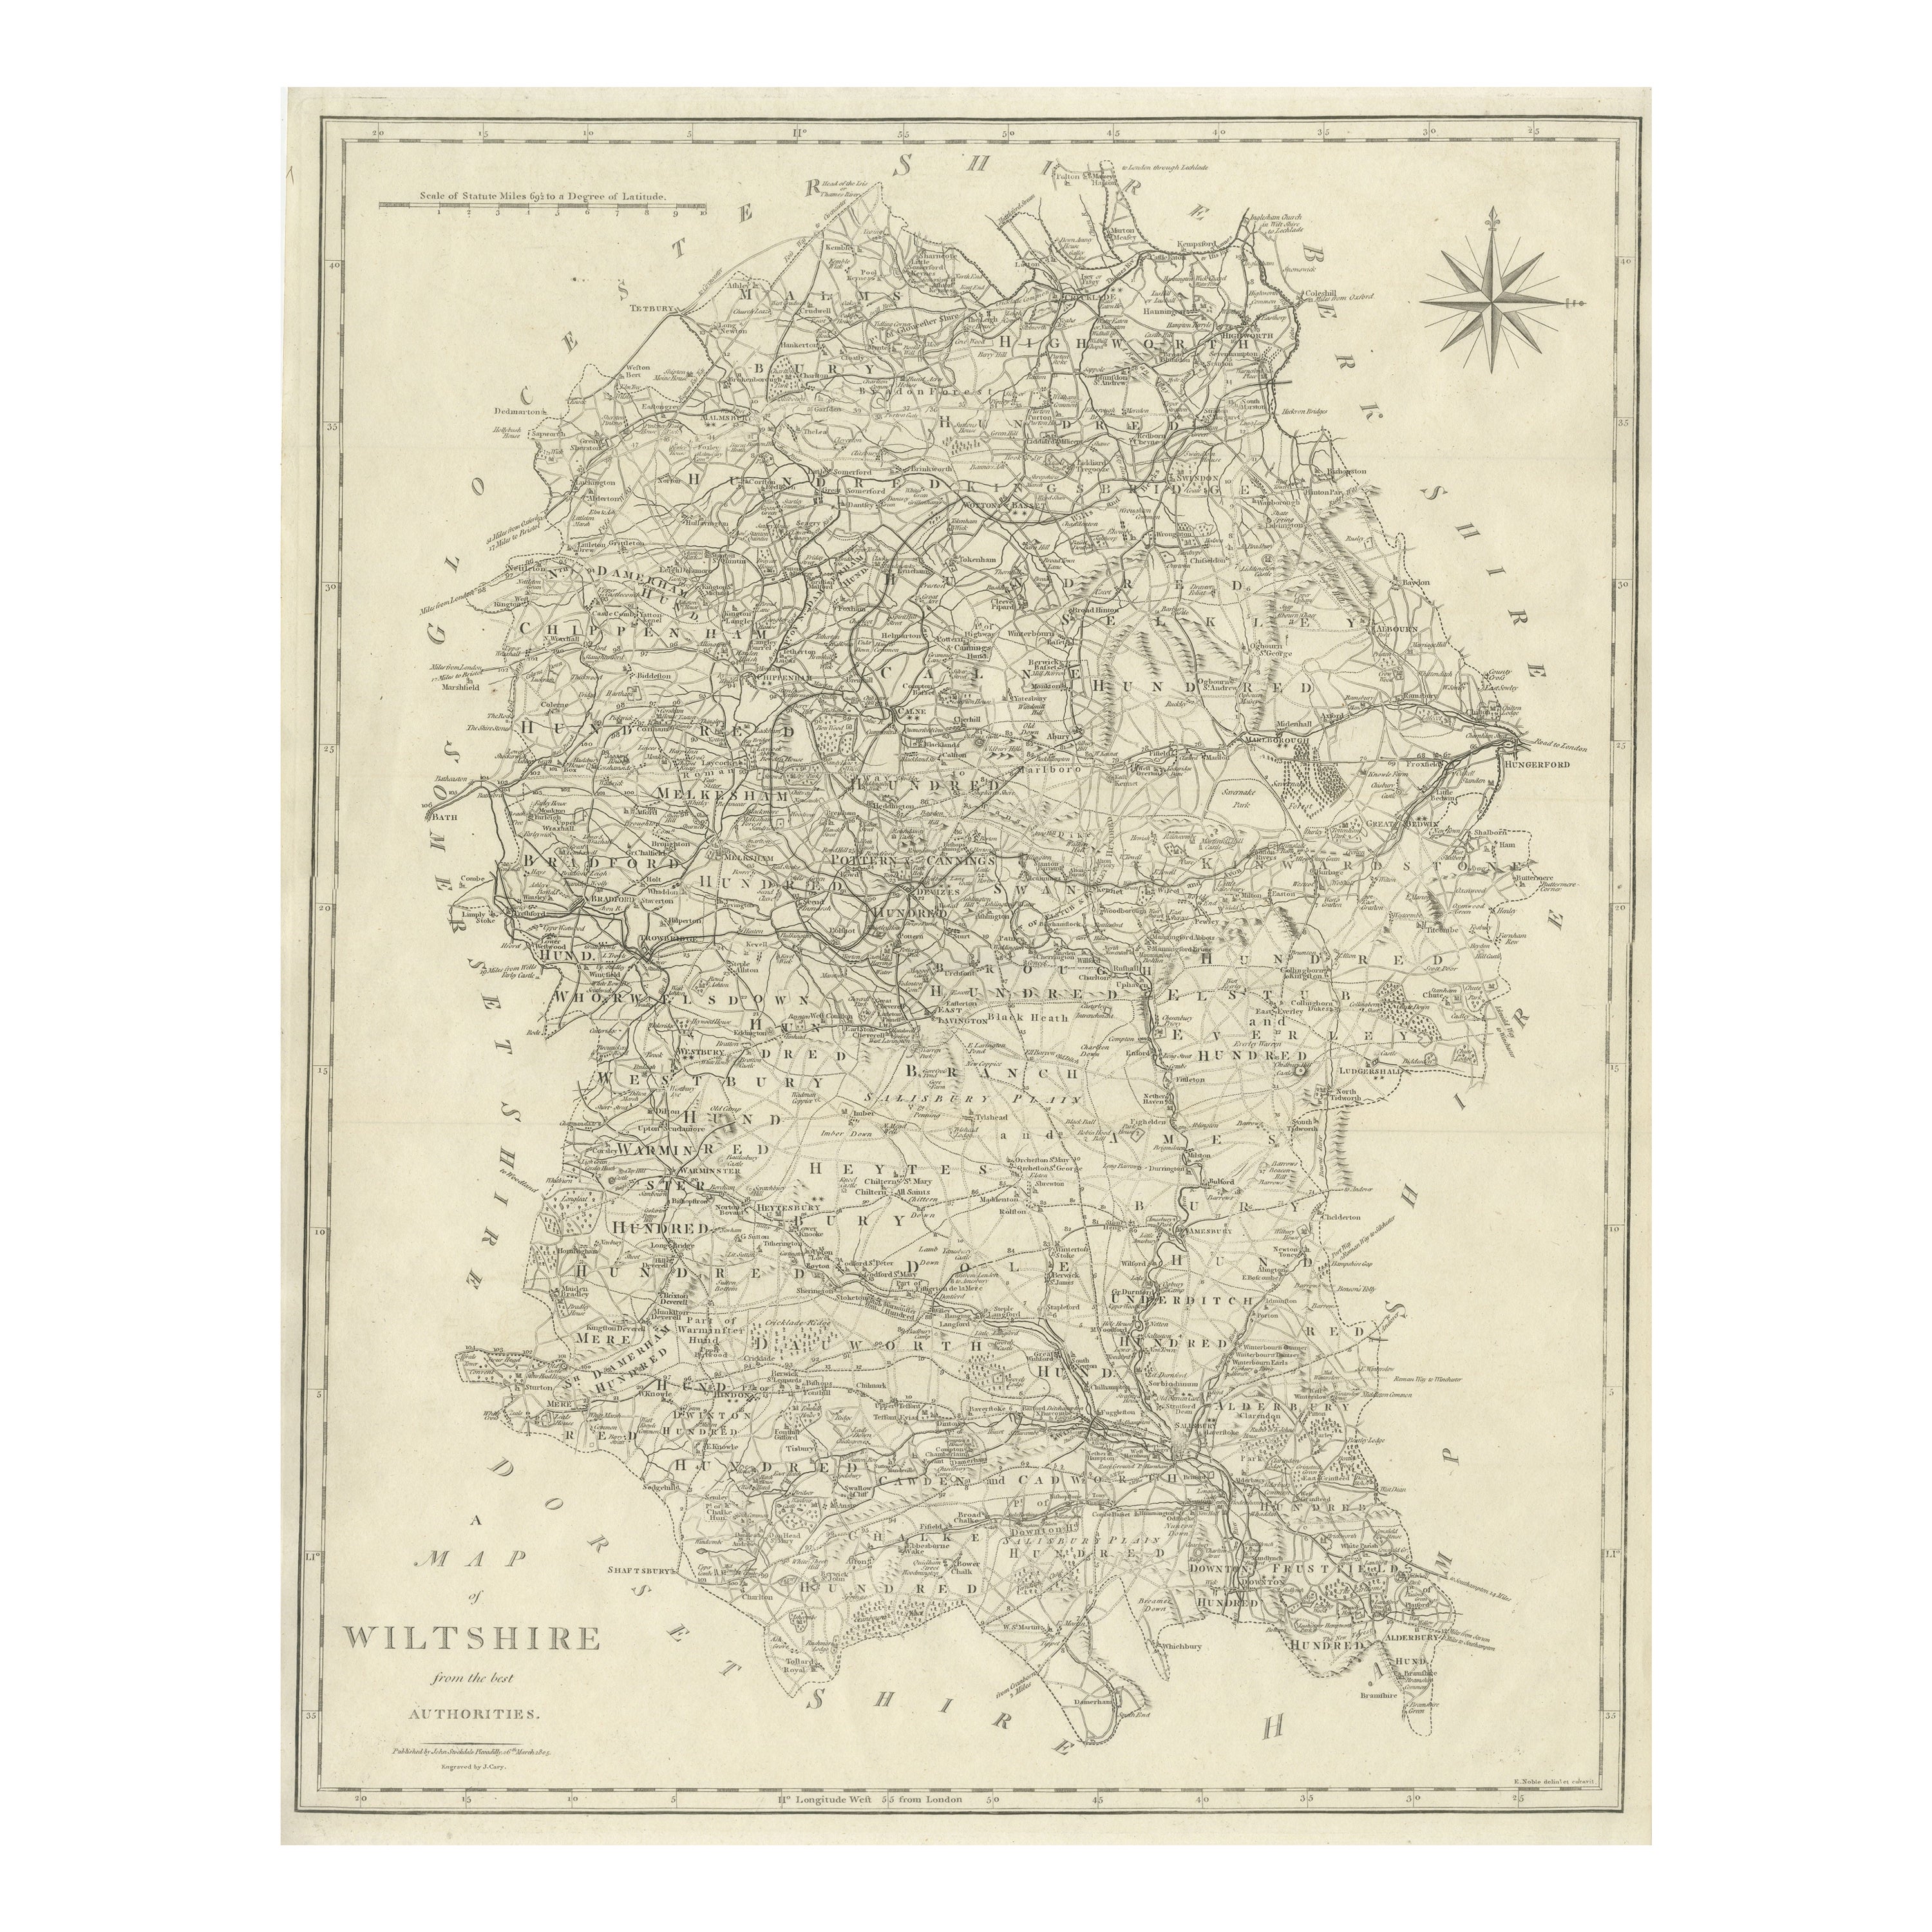 Large Antique County Map of Wiltshire, England, 1805